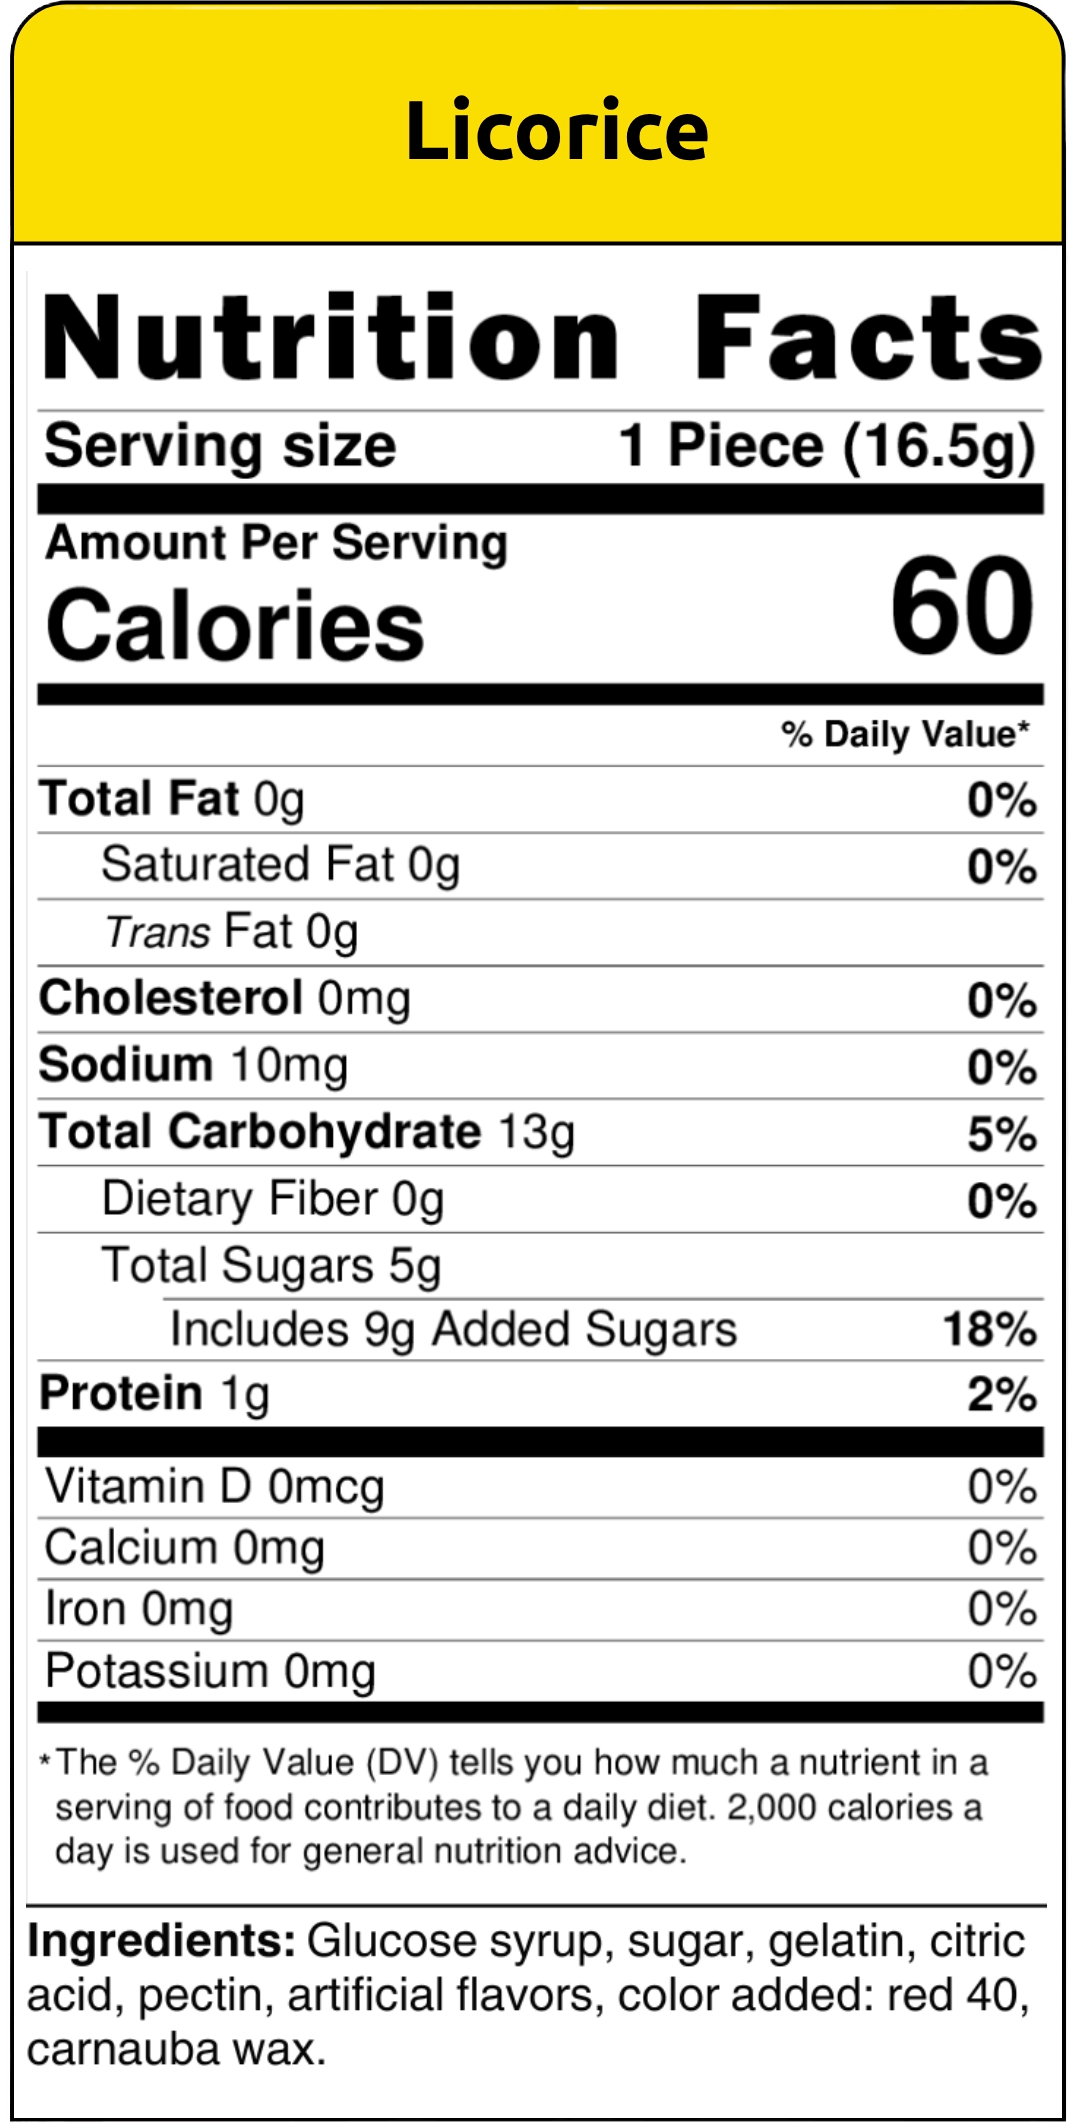 nutritional facts licorice